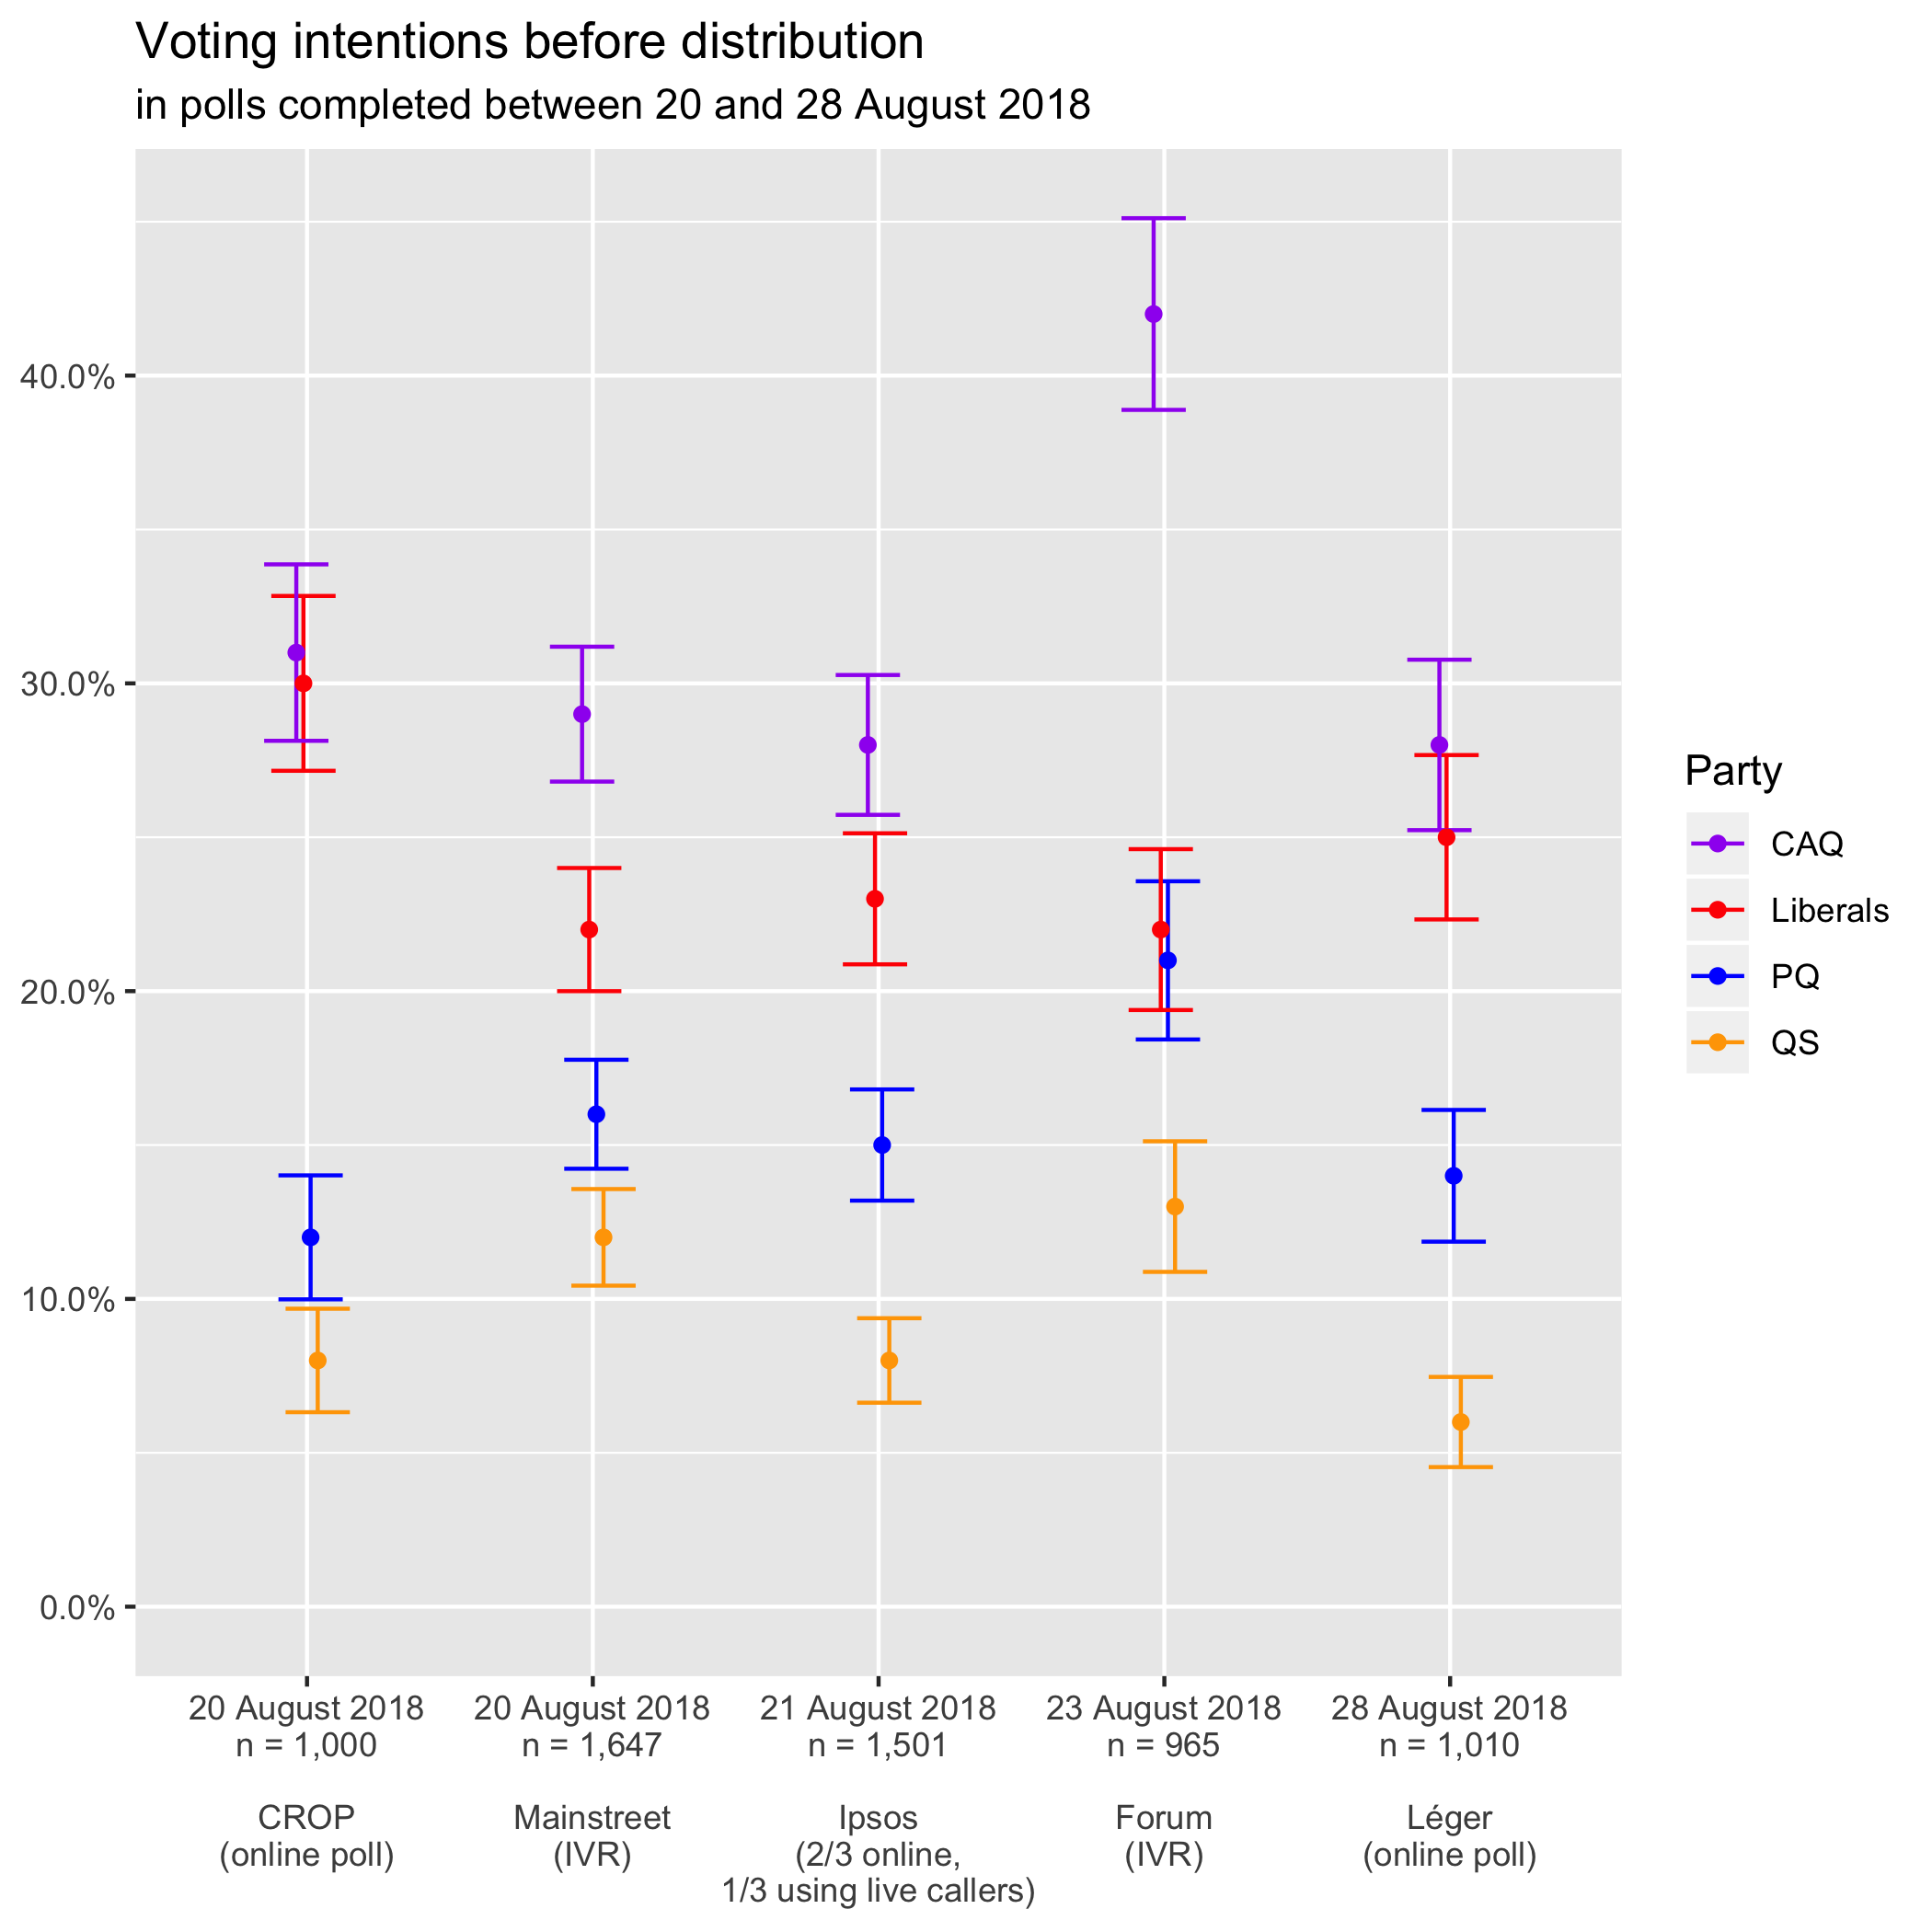 Voting intentions before distribution in polls completed between 20 and 28 August 2018